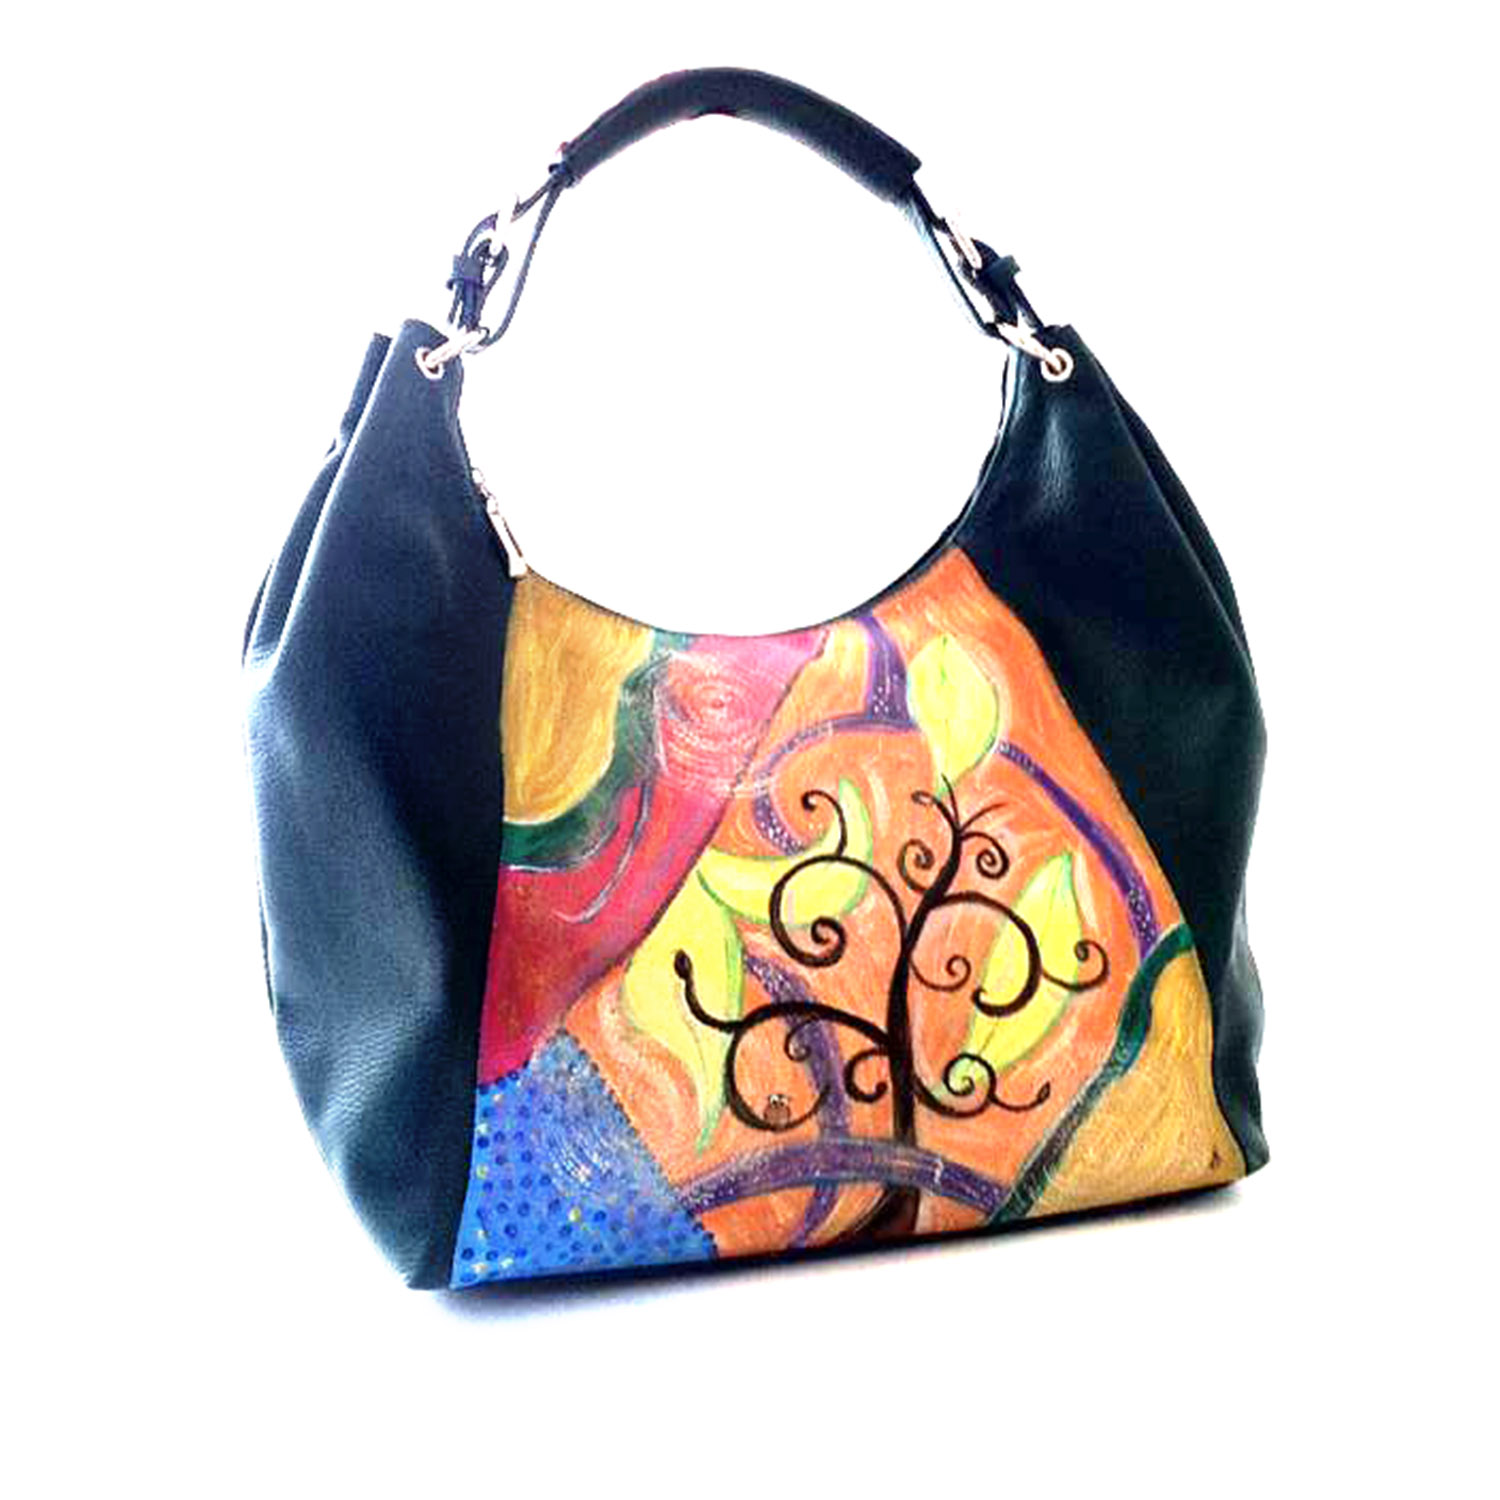 Hand painted bag - The tree of dreams